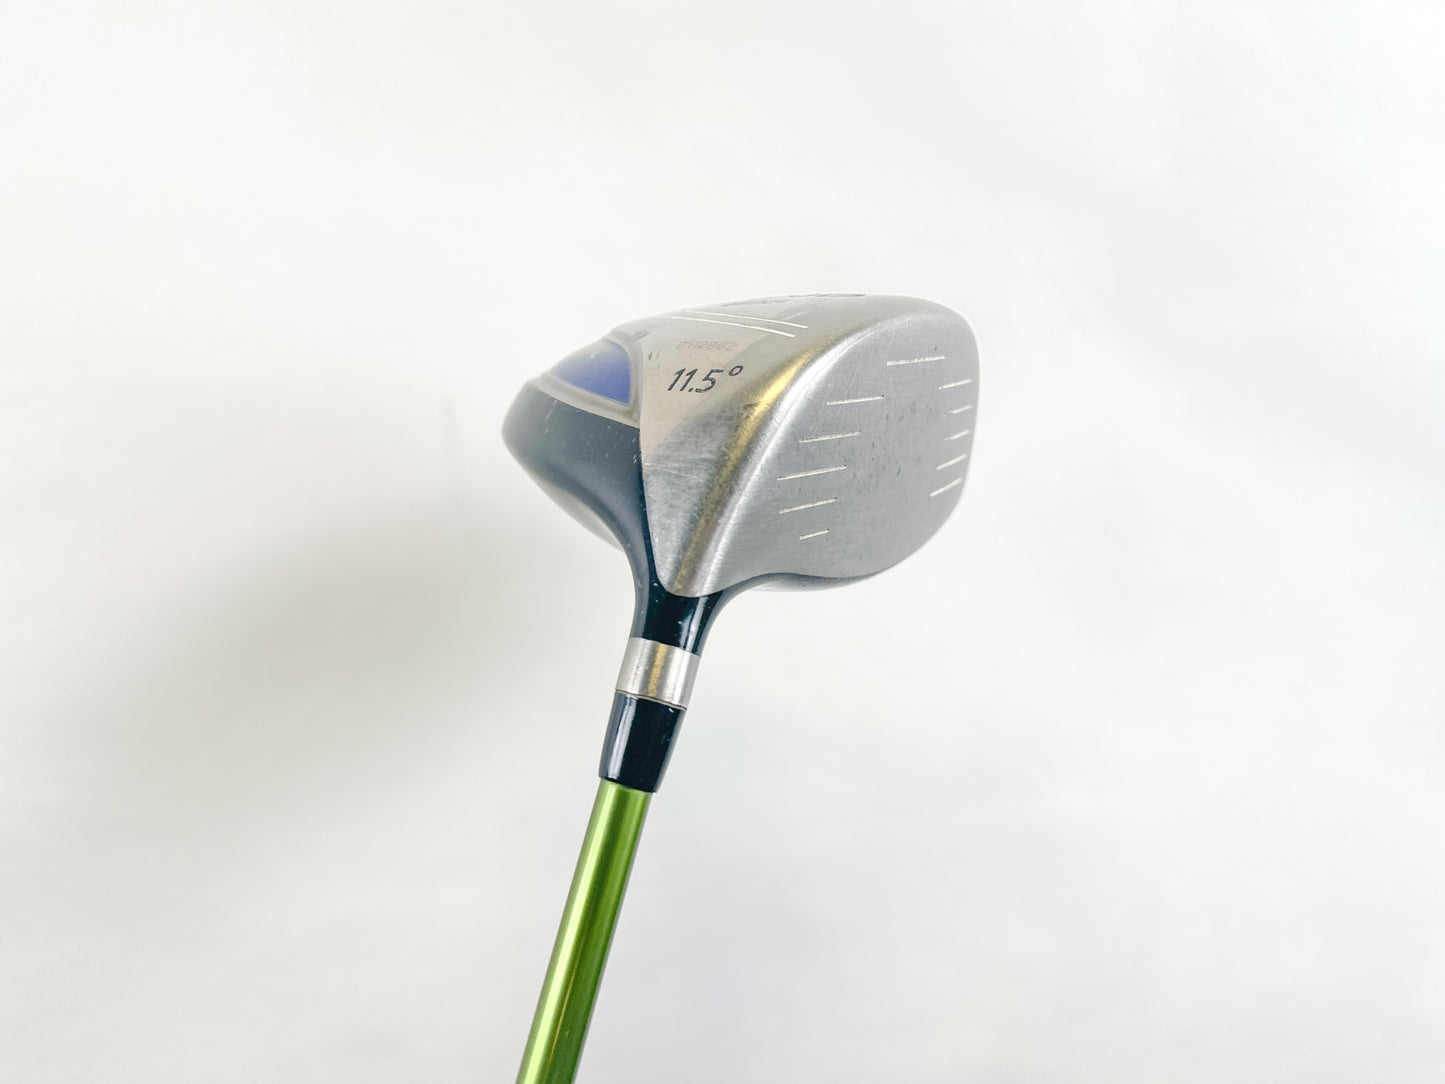 Used Ping G2 Driver - Right-Handed - 11.5 Degrees - Stiff Flex-Next Round